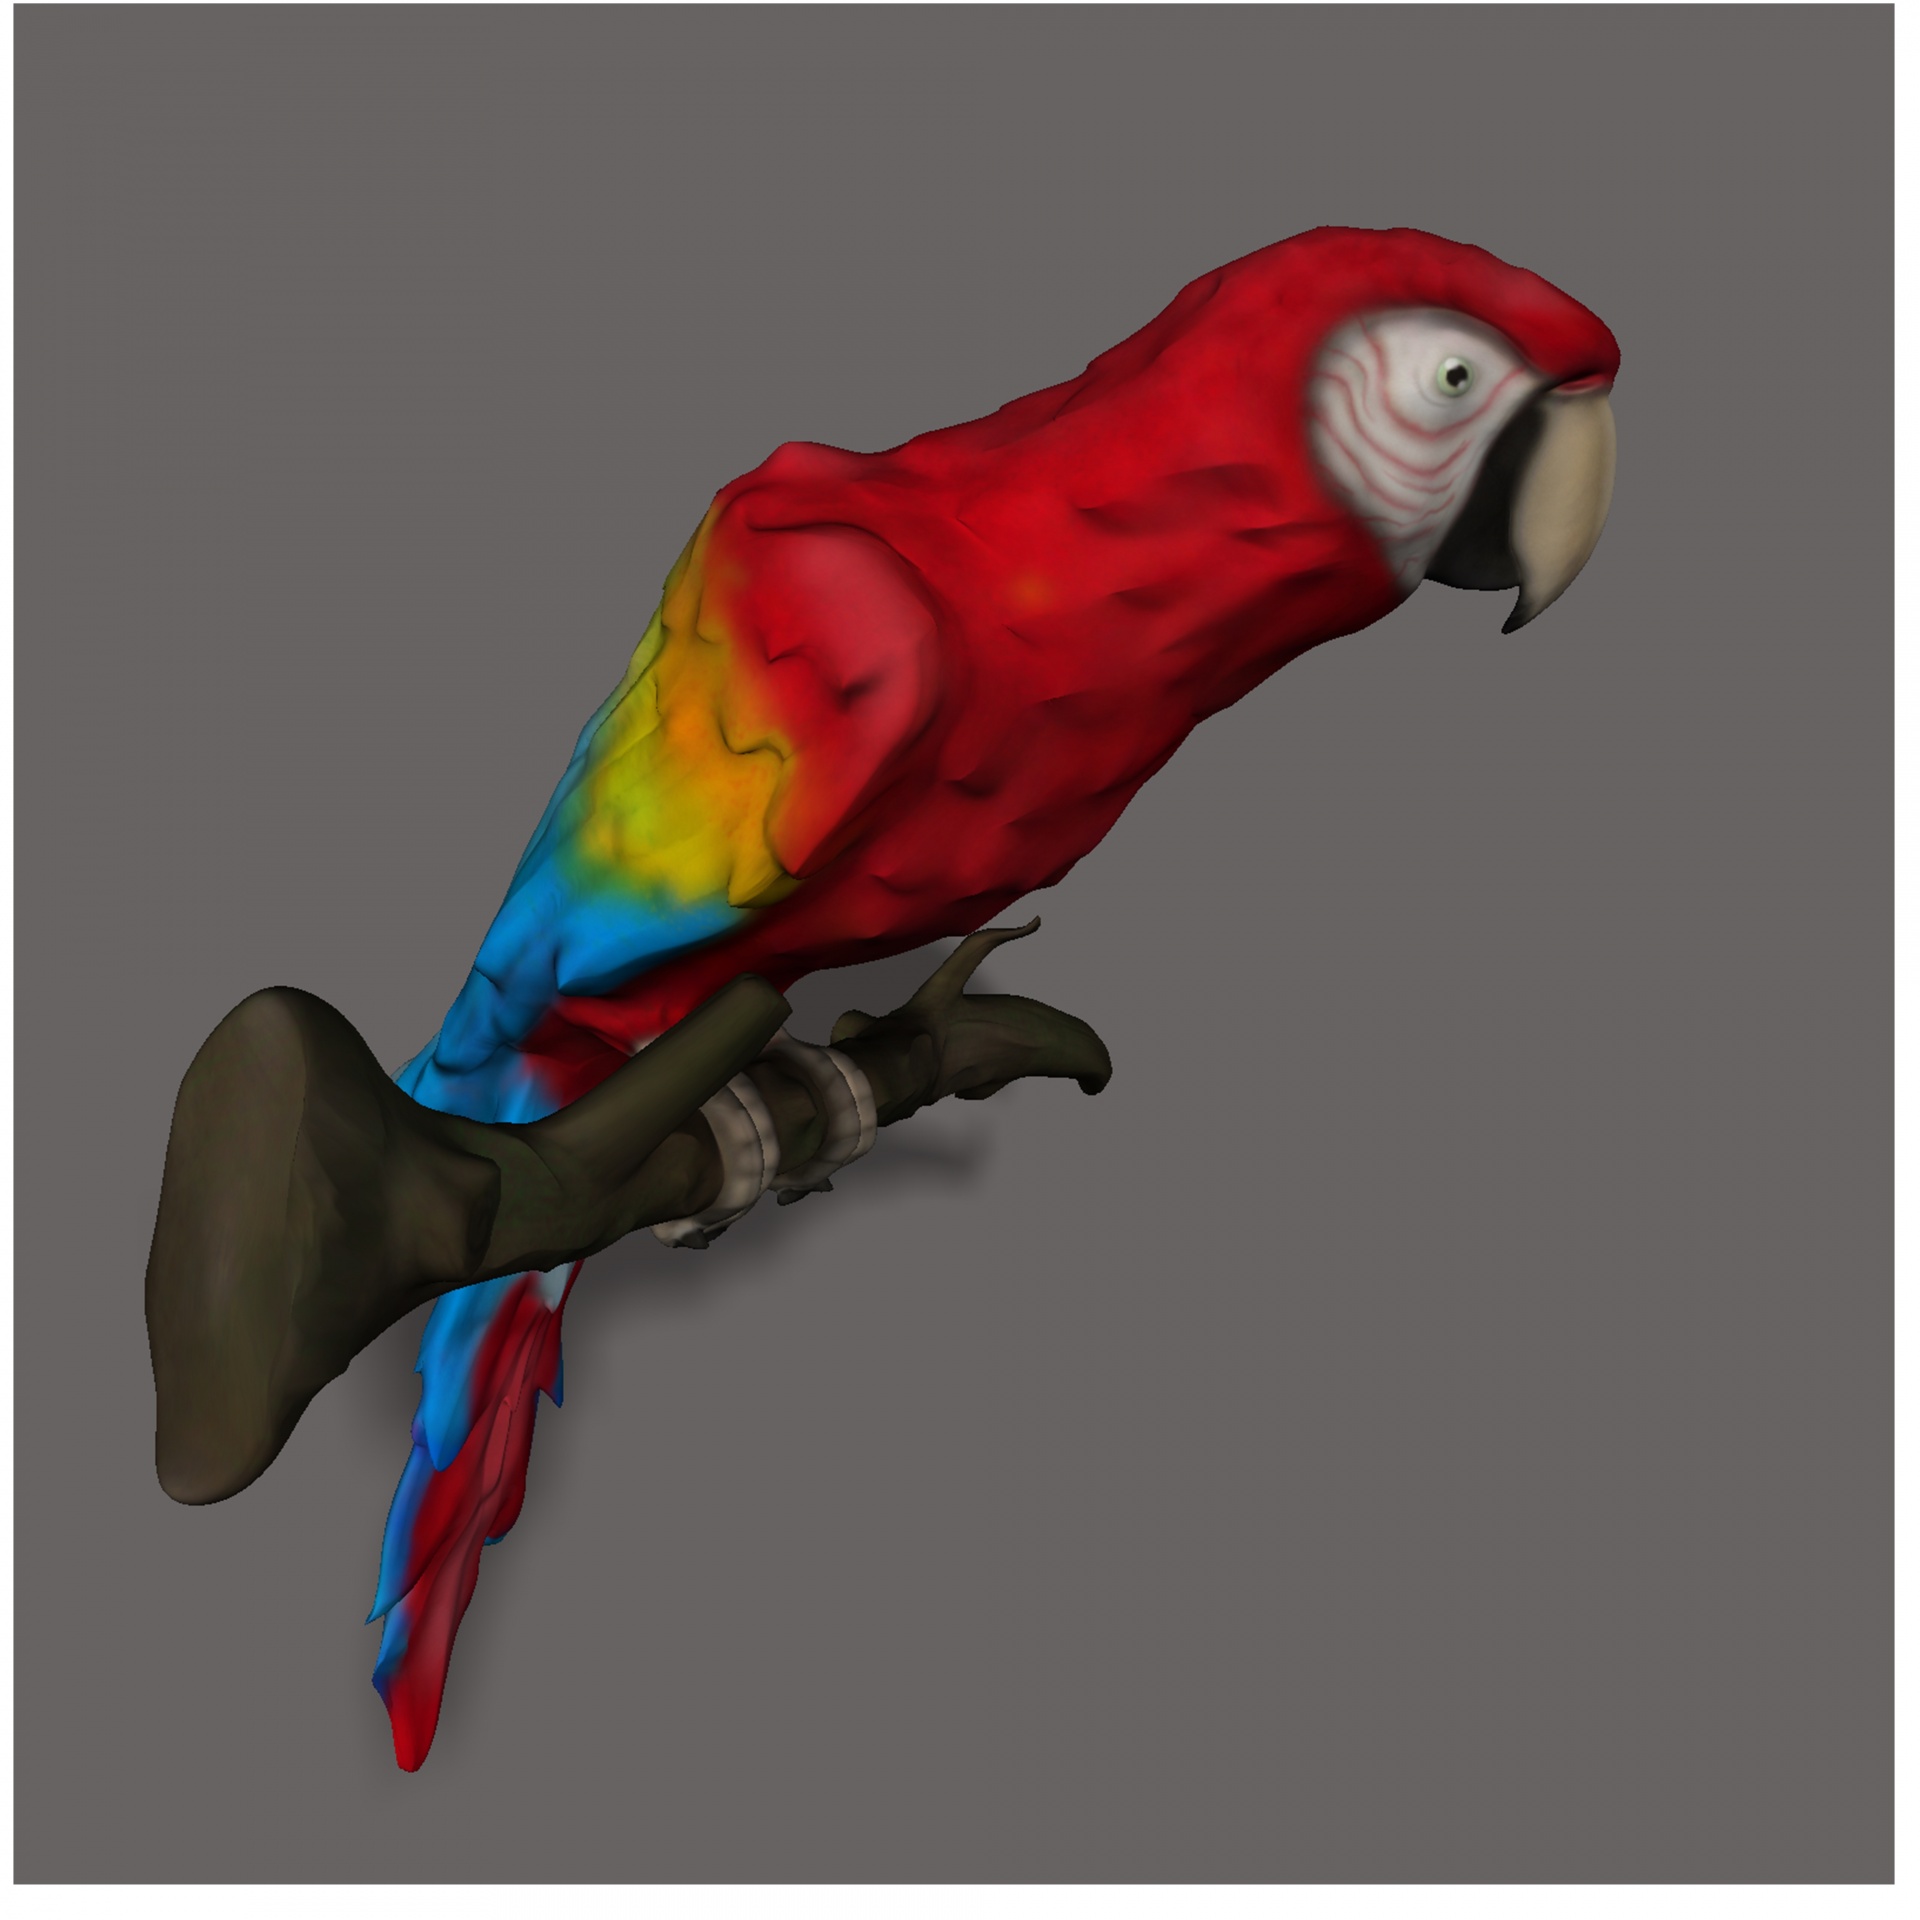 drawing of a long-tailed brilliantly colored parrot on gray background